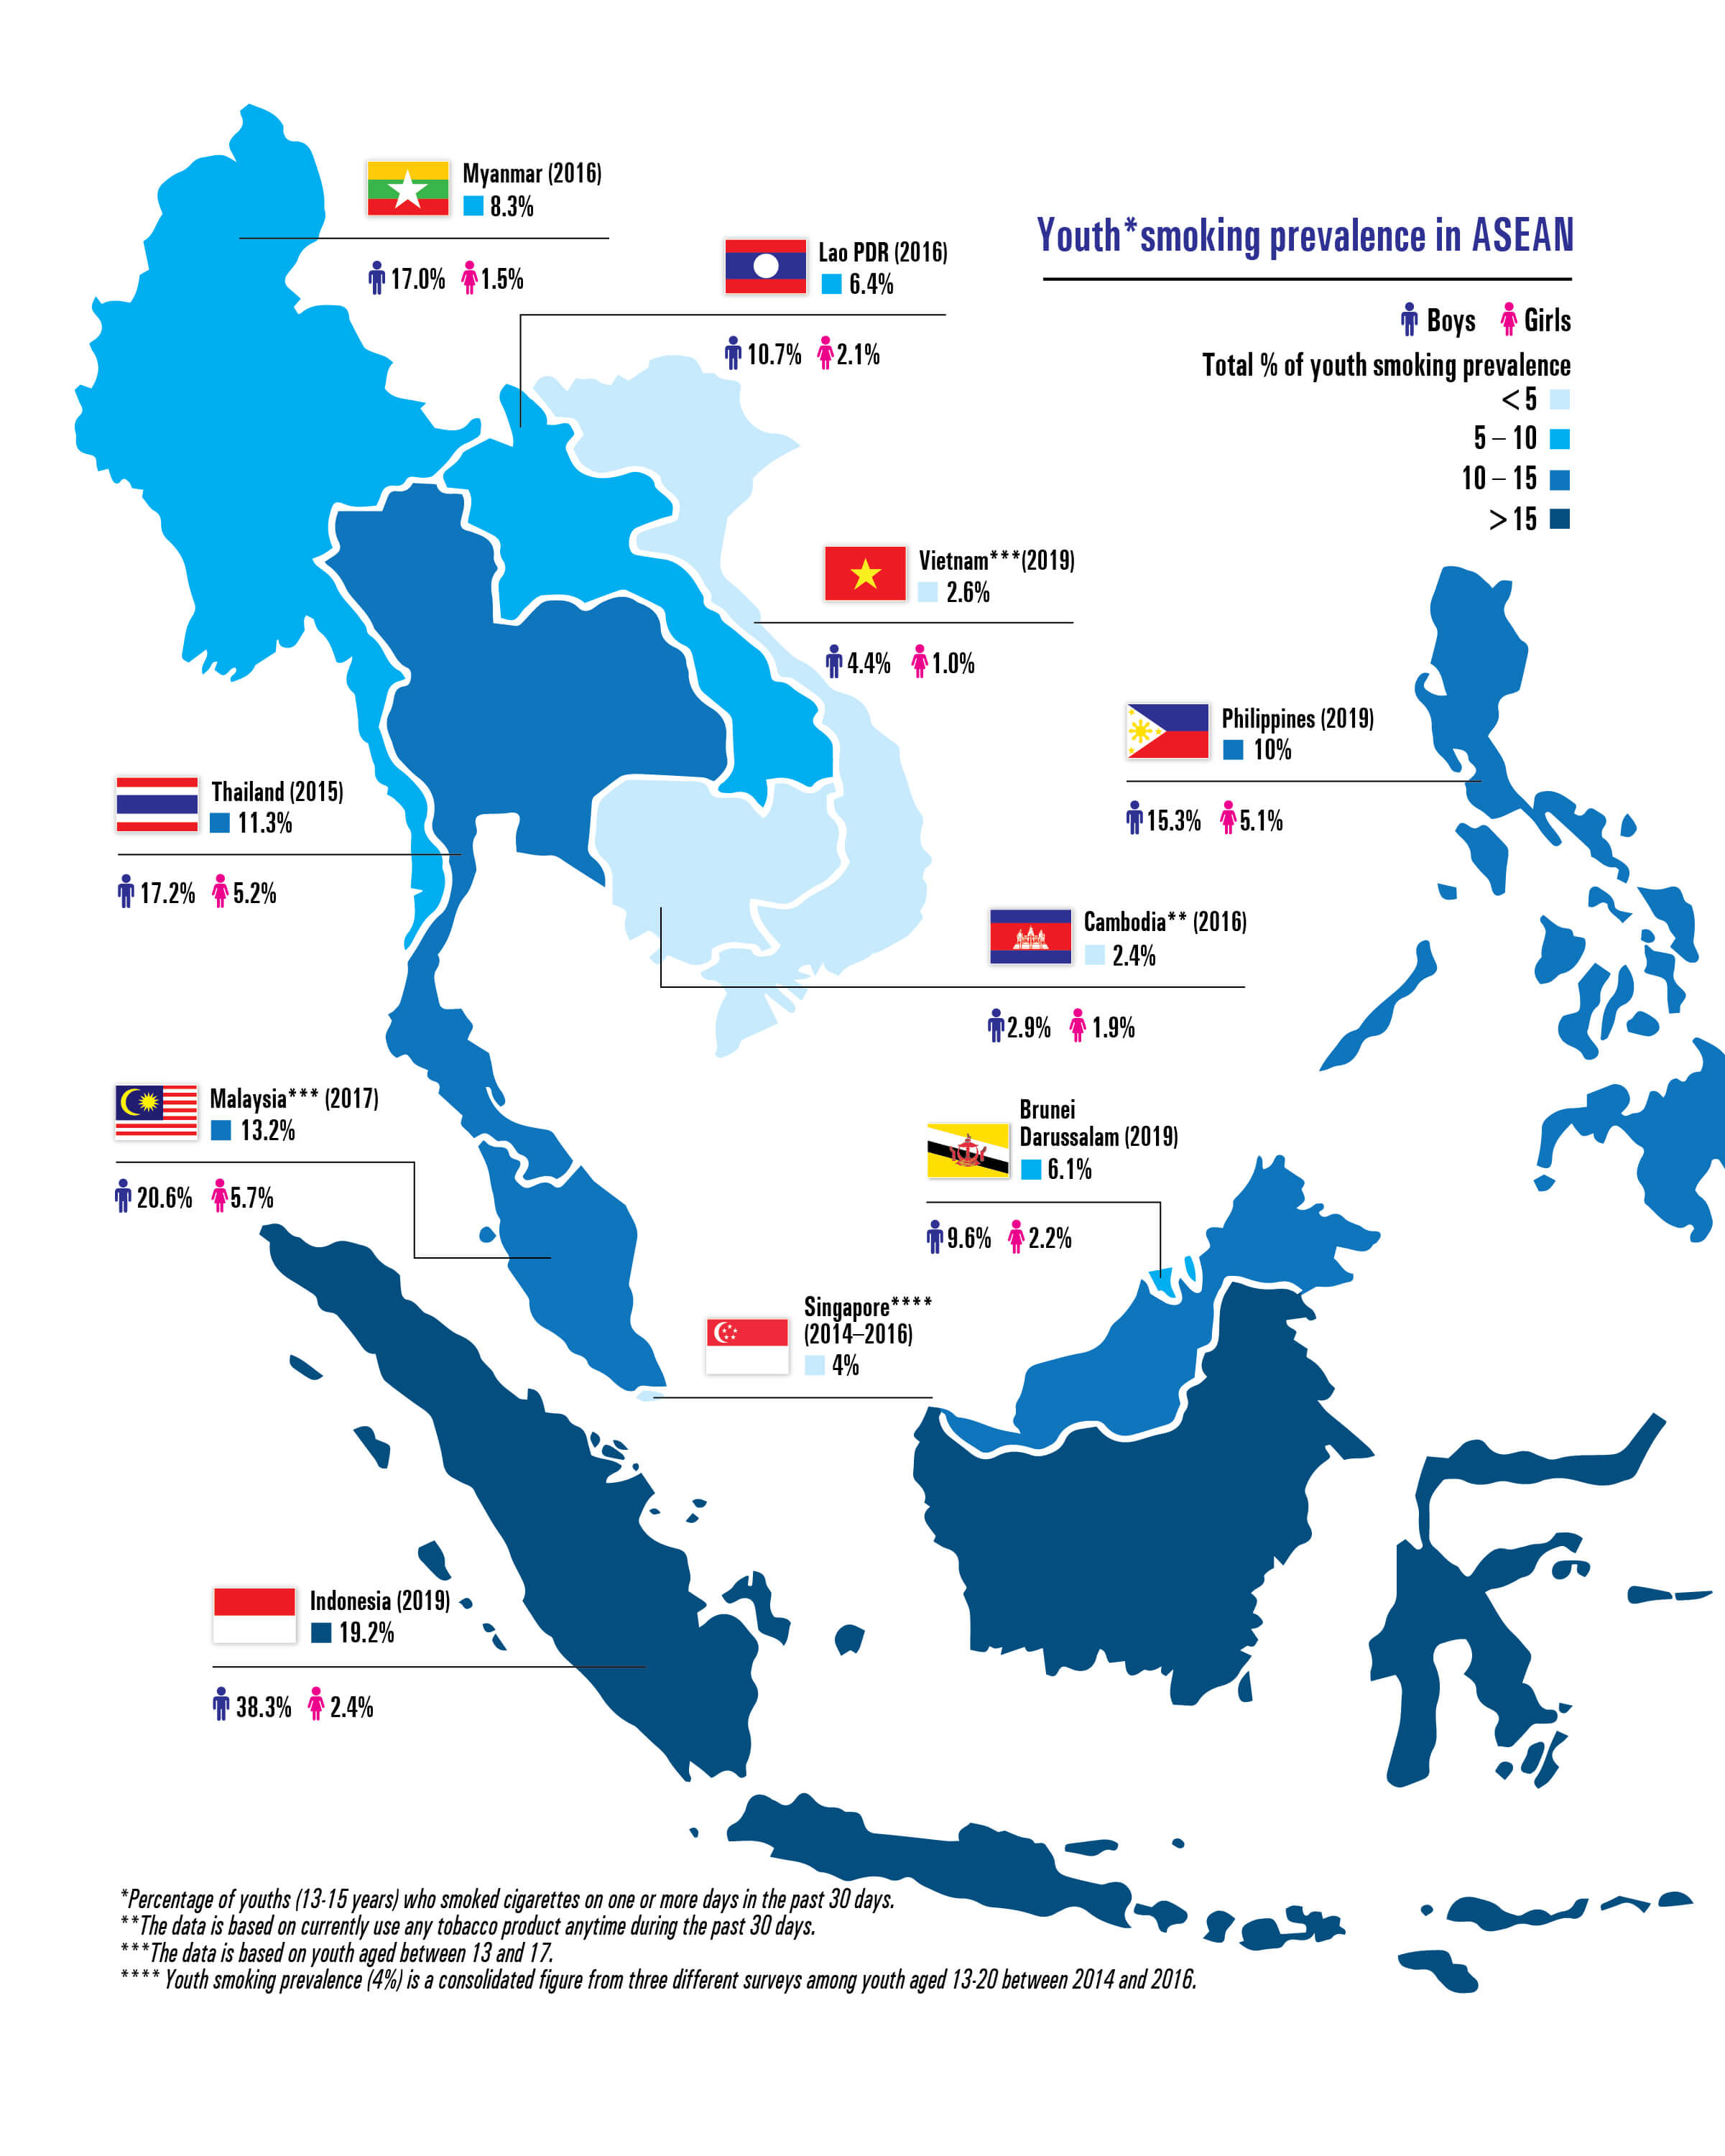 Youth*smoking prevalence in ASEAN